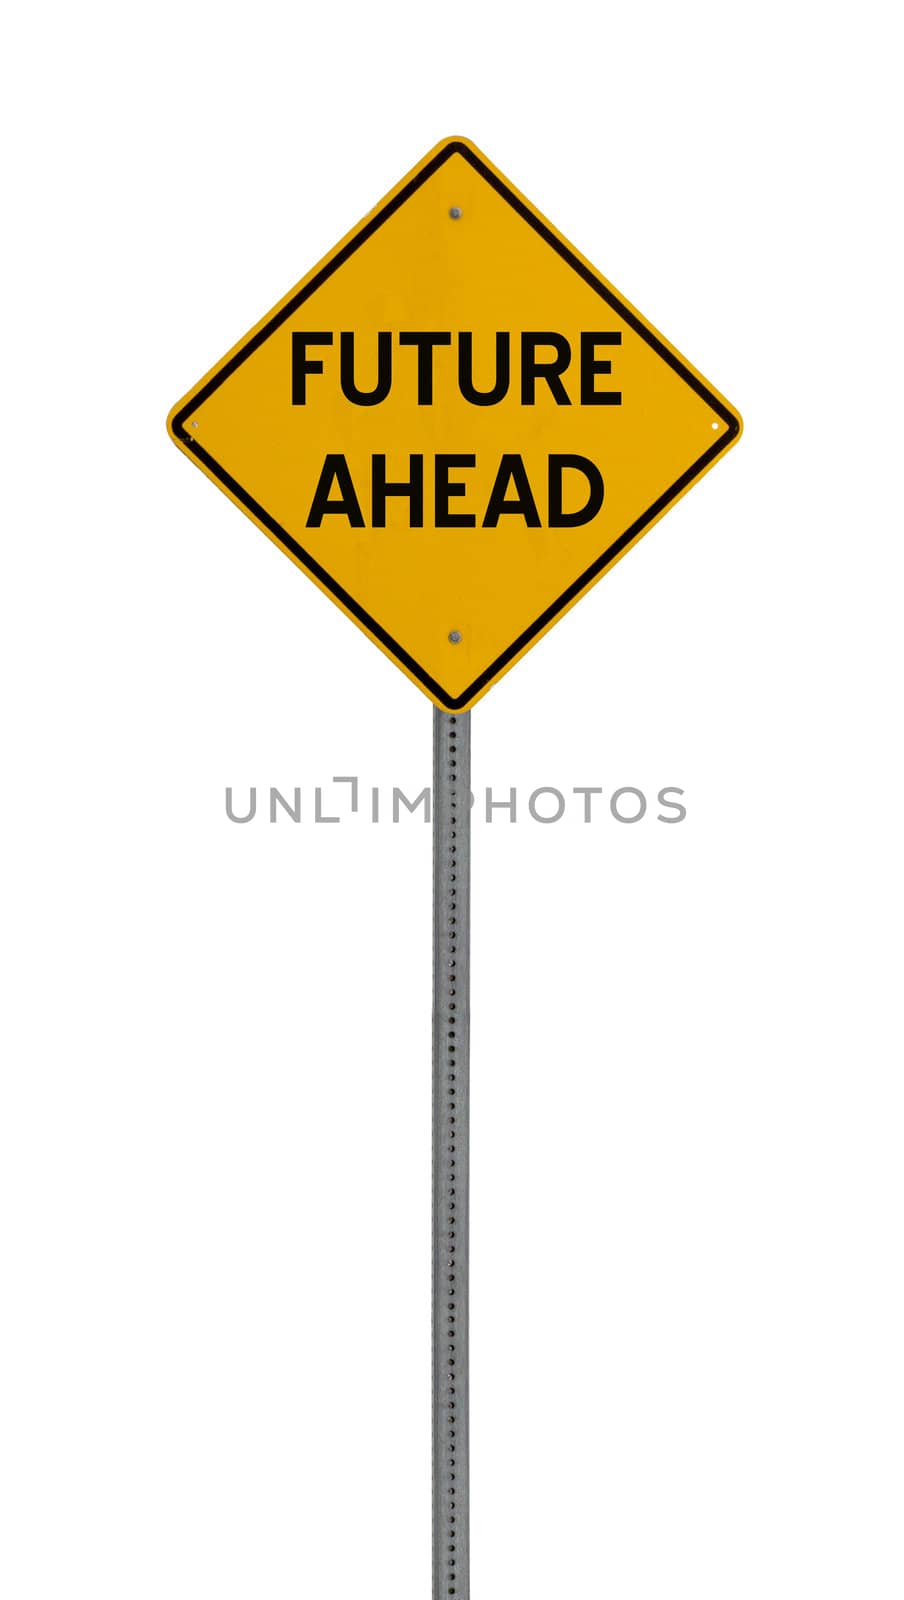  future - Yellow road warning sign by jeremywhat